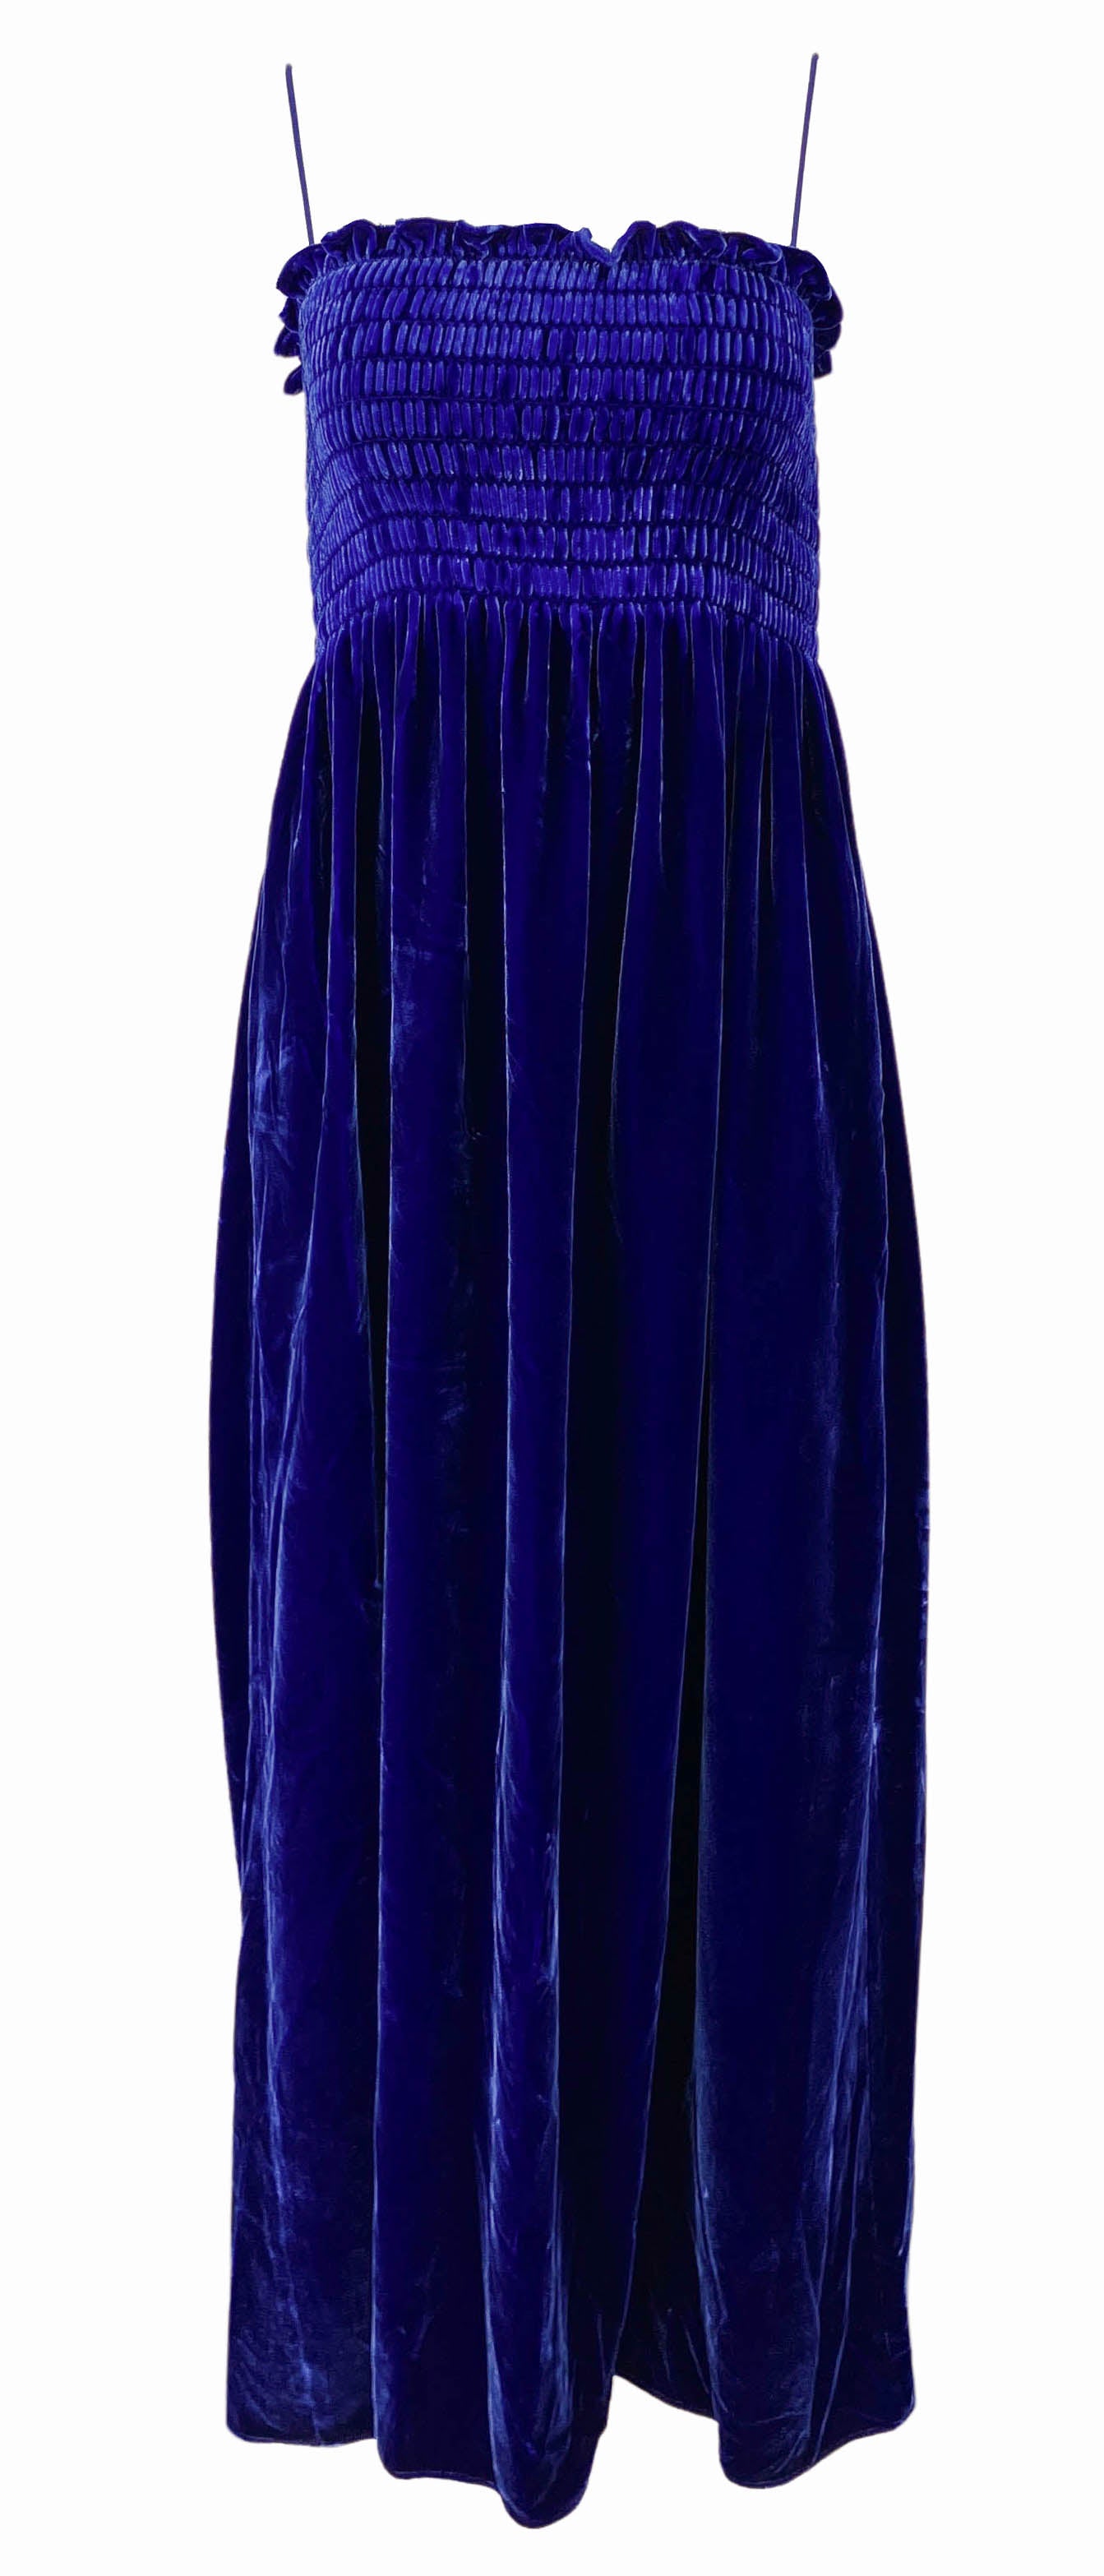 Gucci Velvet Maxi Dress in Navy Blue - Discounts on Gucci at UAL